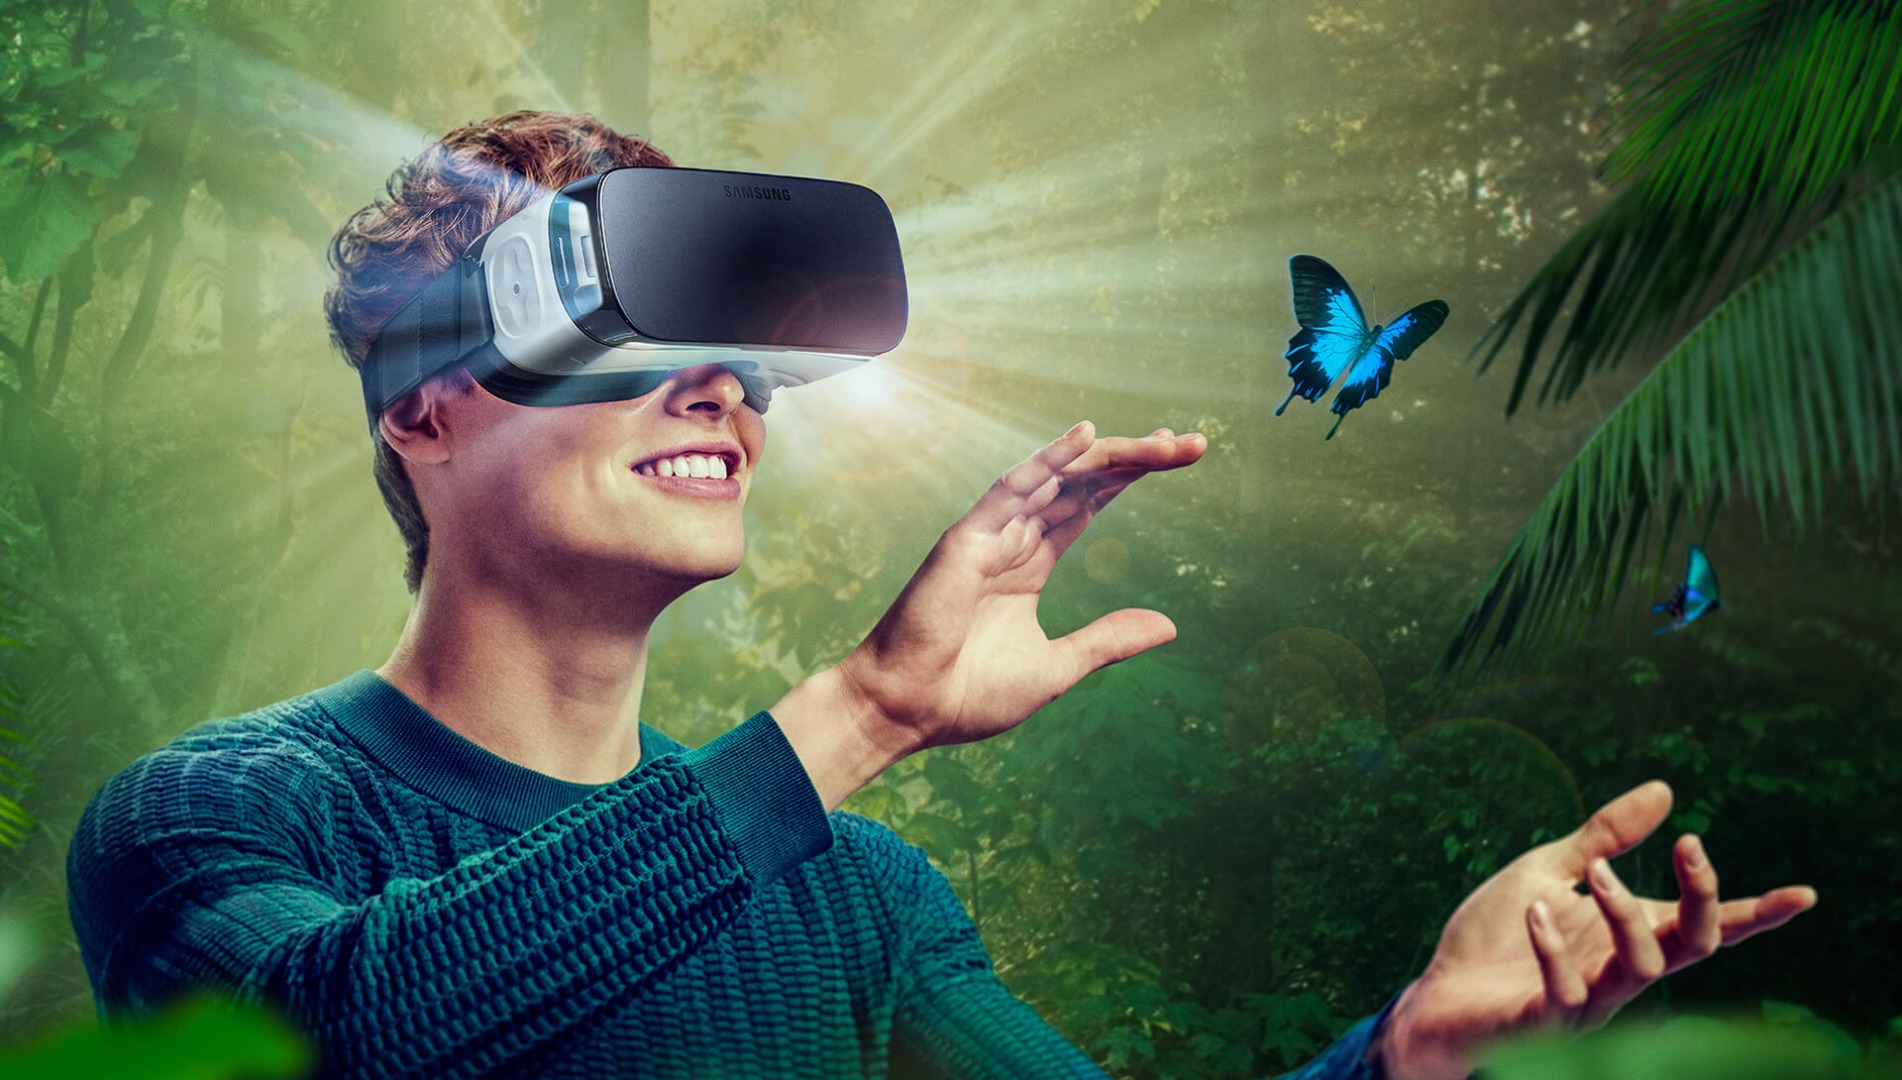 Using Virtual Reality for Brand Marketing & Product Showcasing